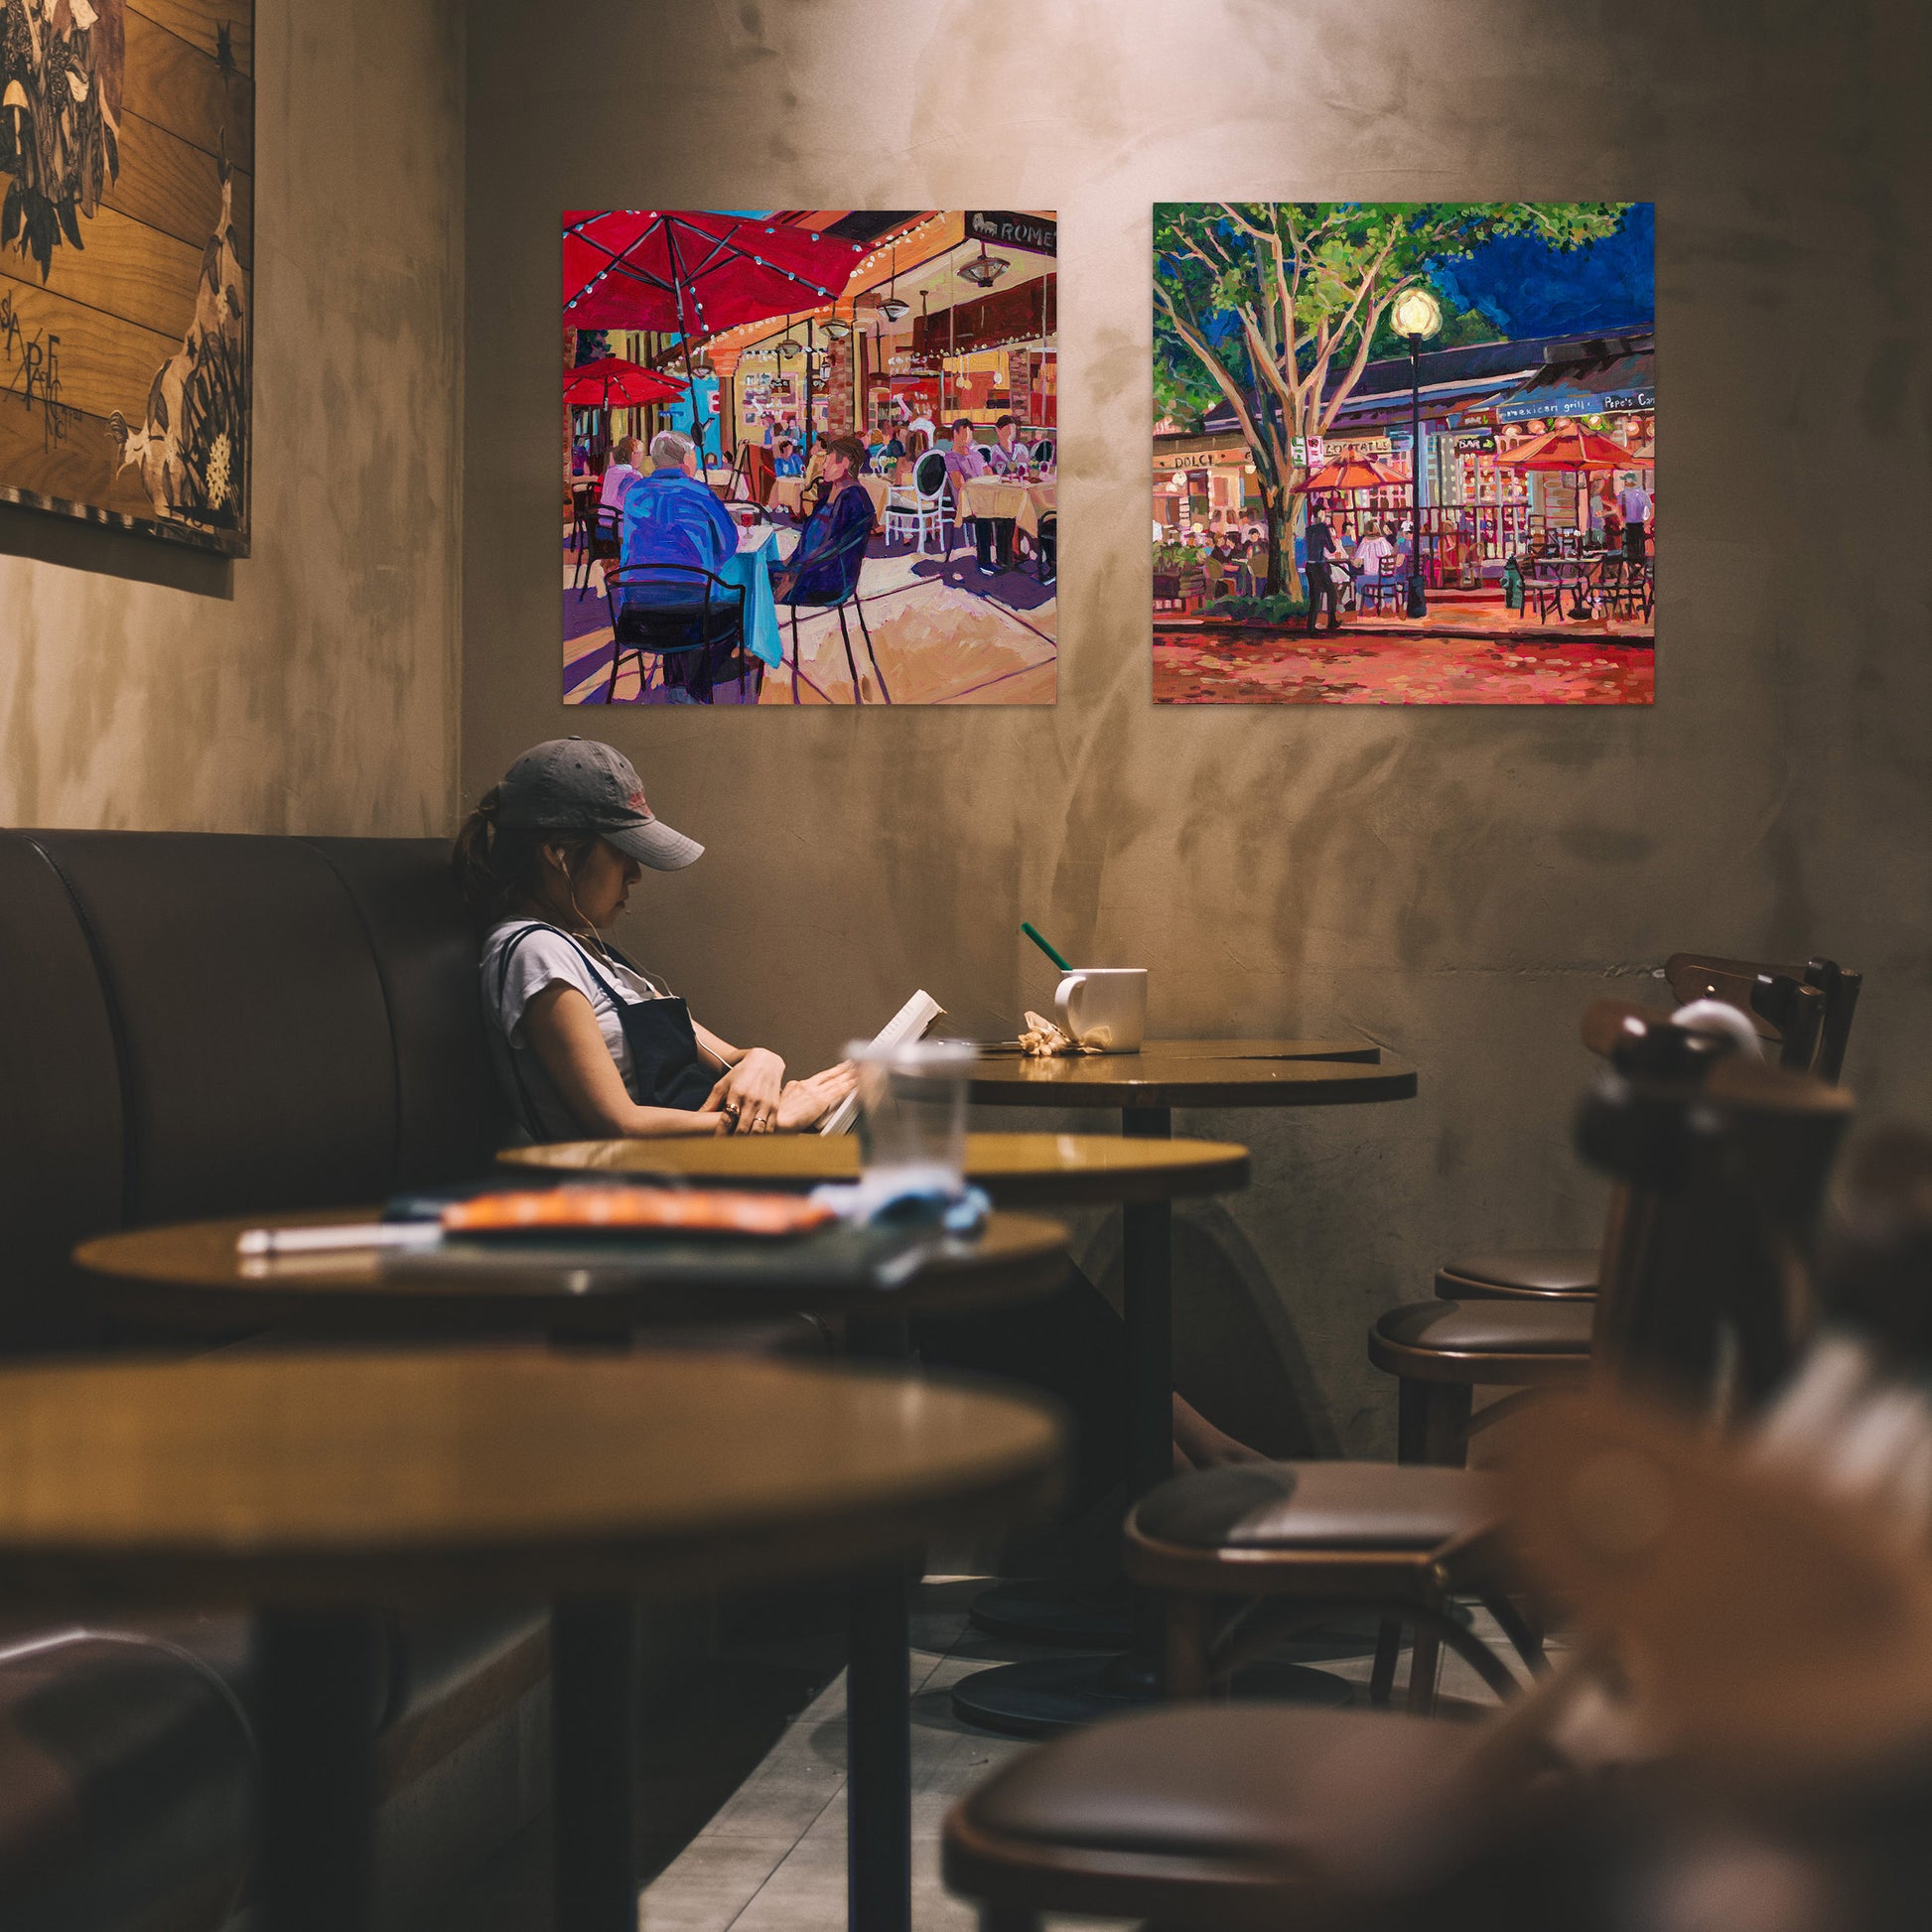 Two Nightlife paintings hung in cafe, Winter Park Nightlife 5 painting 20x20 inches vibrant outdoor cafe scene with dramatic light people seated and umbrellas